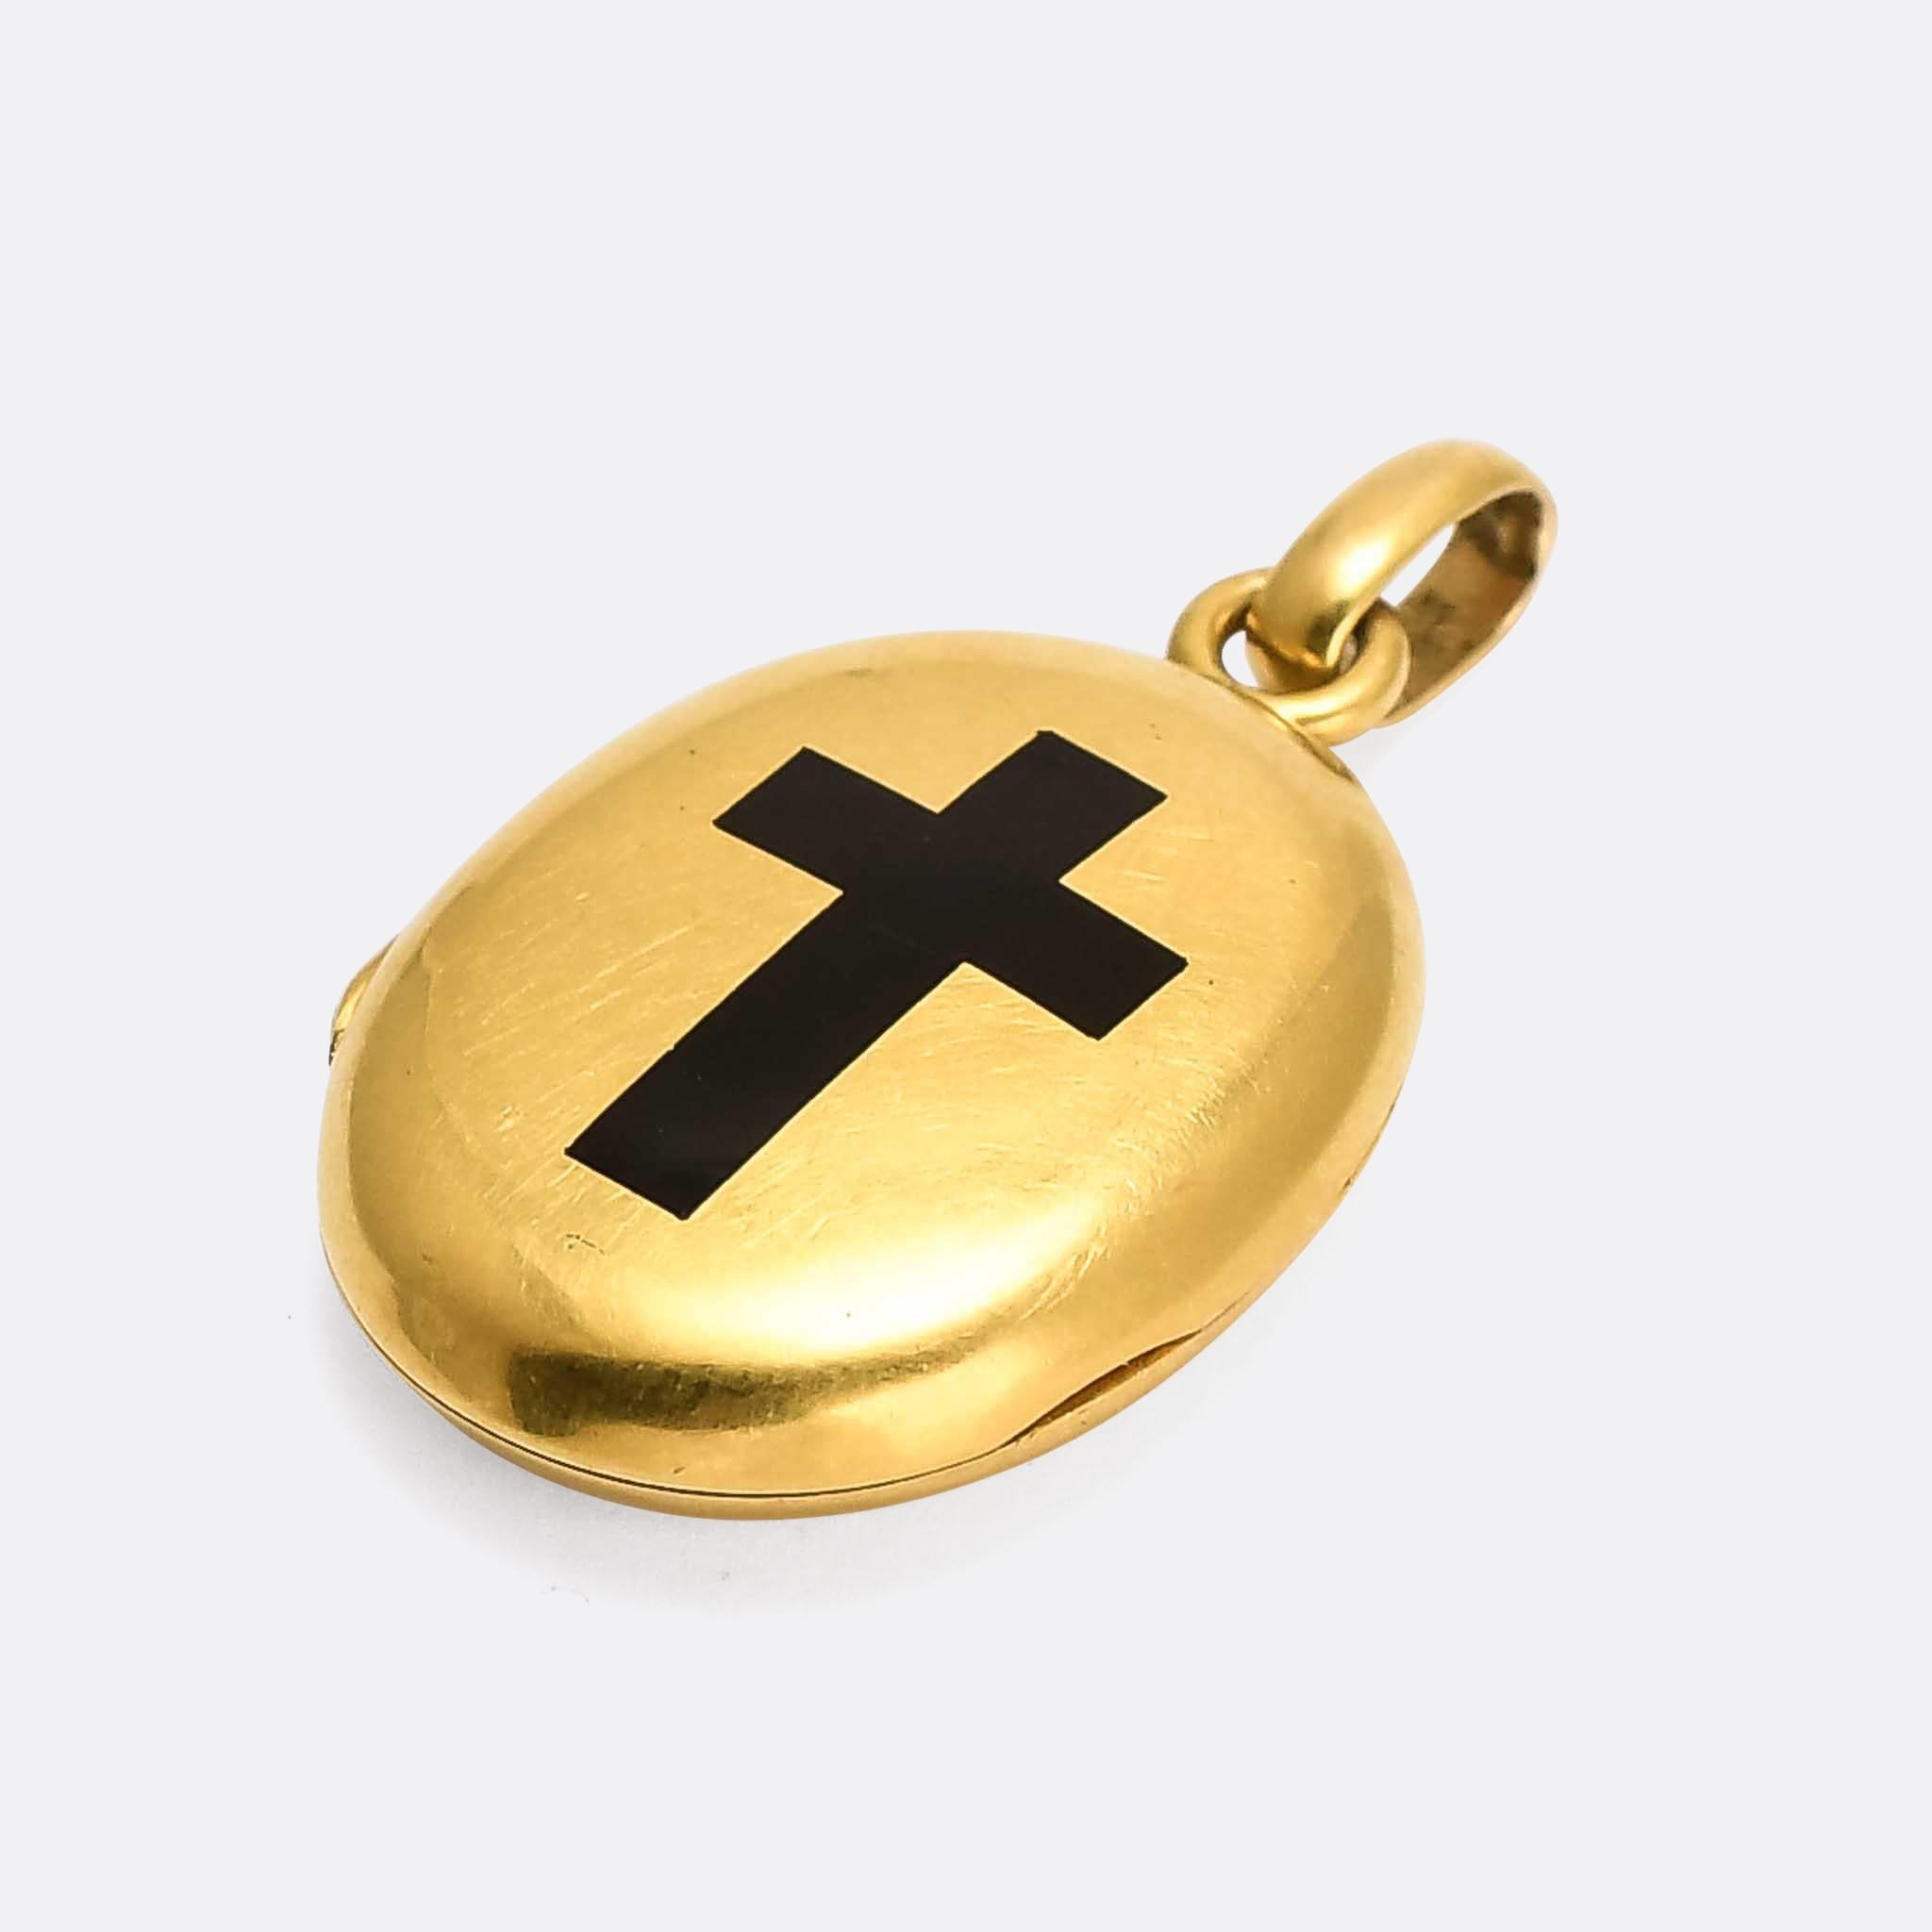 A smaller scale Victorian black enamel cross locket dating from the latter half of the 19th Century. It's crafted in 18 karat yellow gold, and measures just over an inch in length. Particularly good quality, and remaining in great condition with no